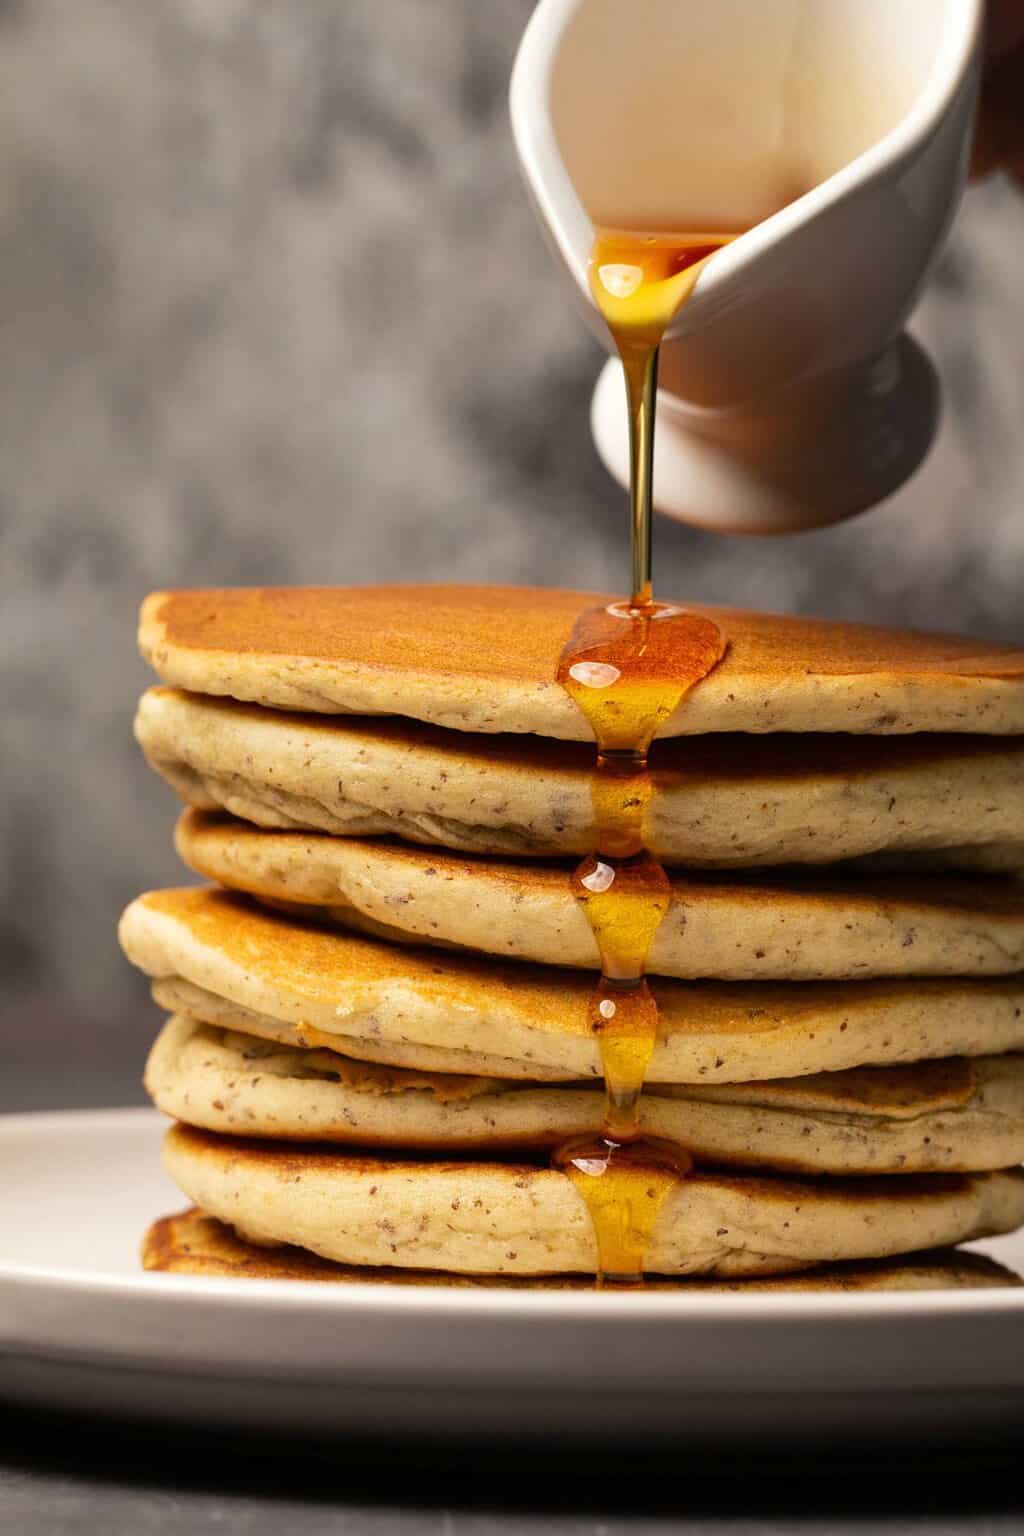 Syrup pouring over a stack of vegan gluten free pancakes.